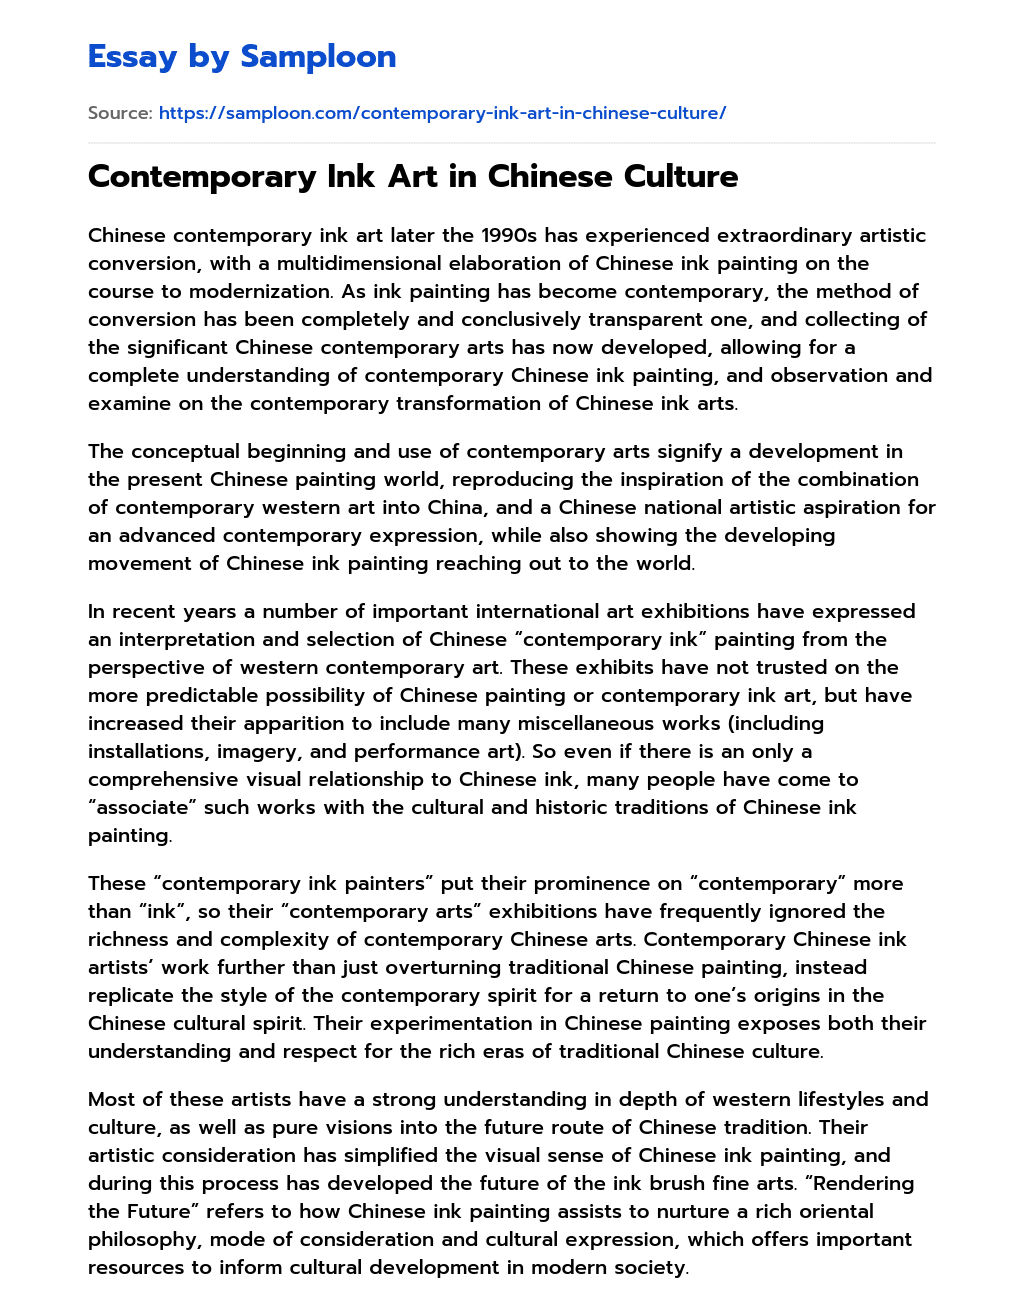 Contemporary Ink Art in Chinese Culture essay